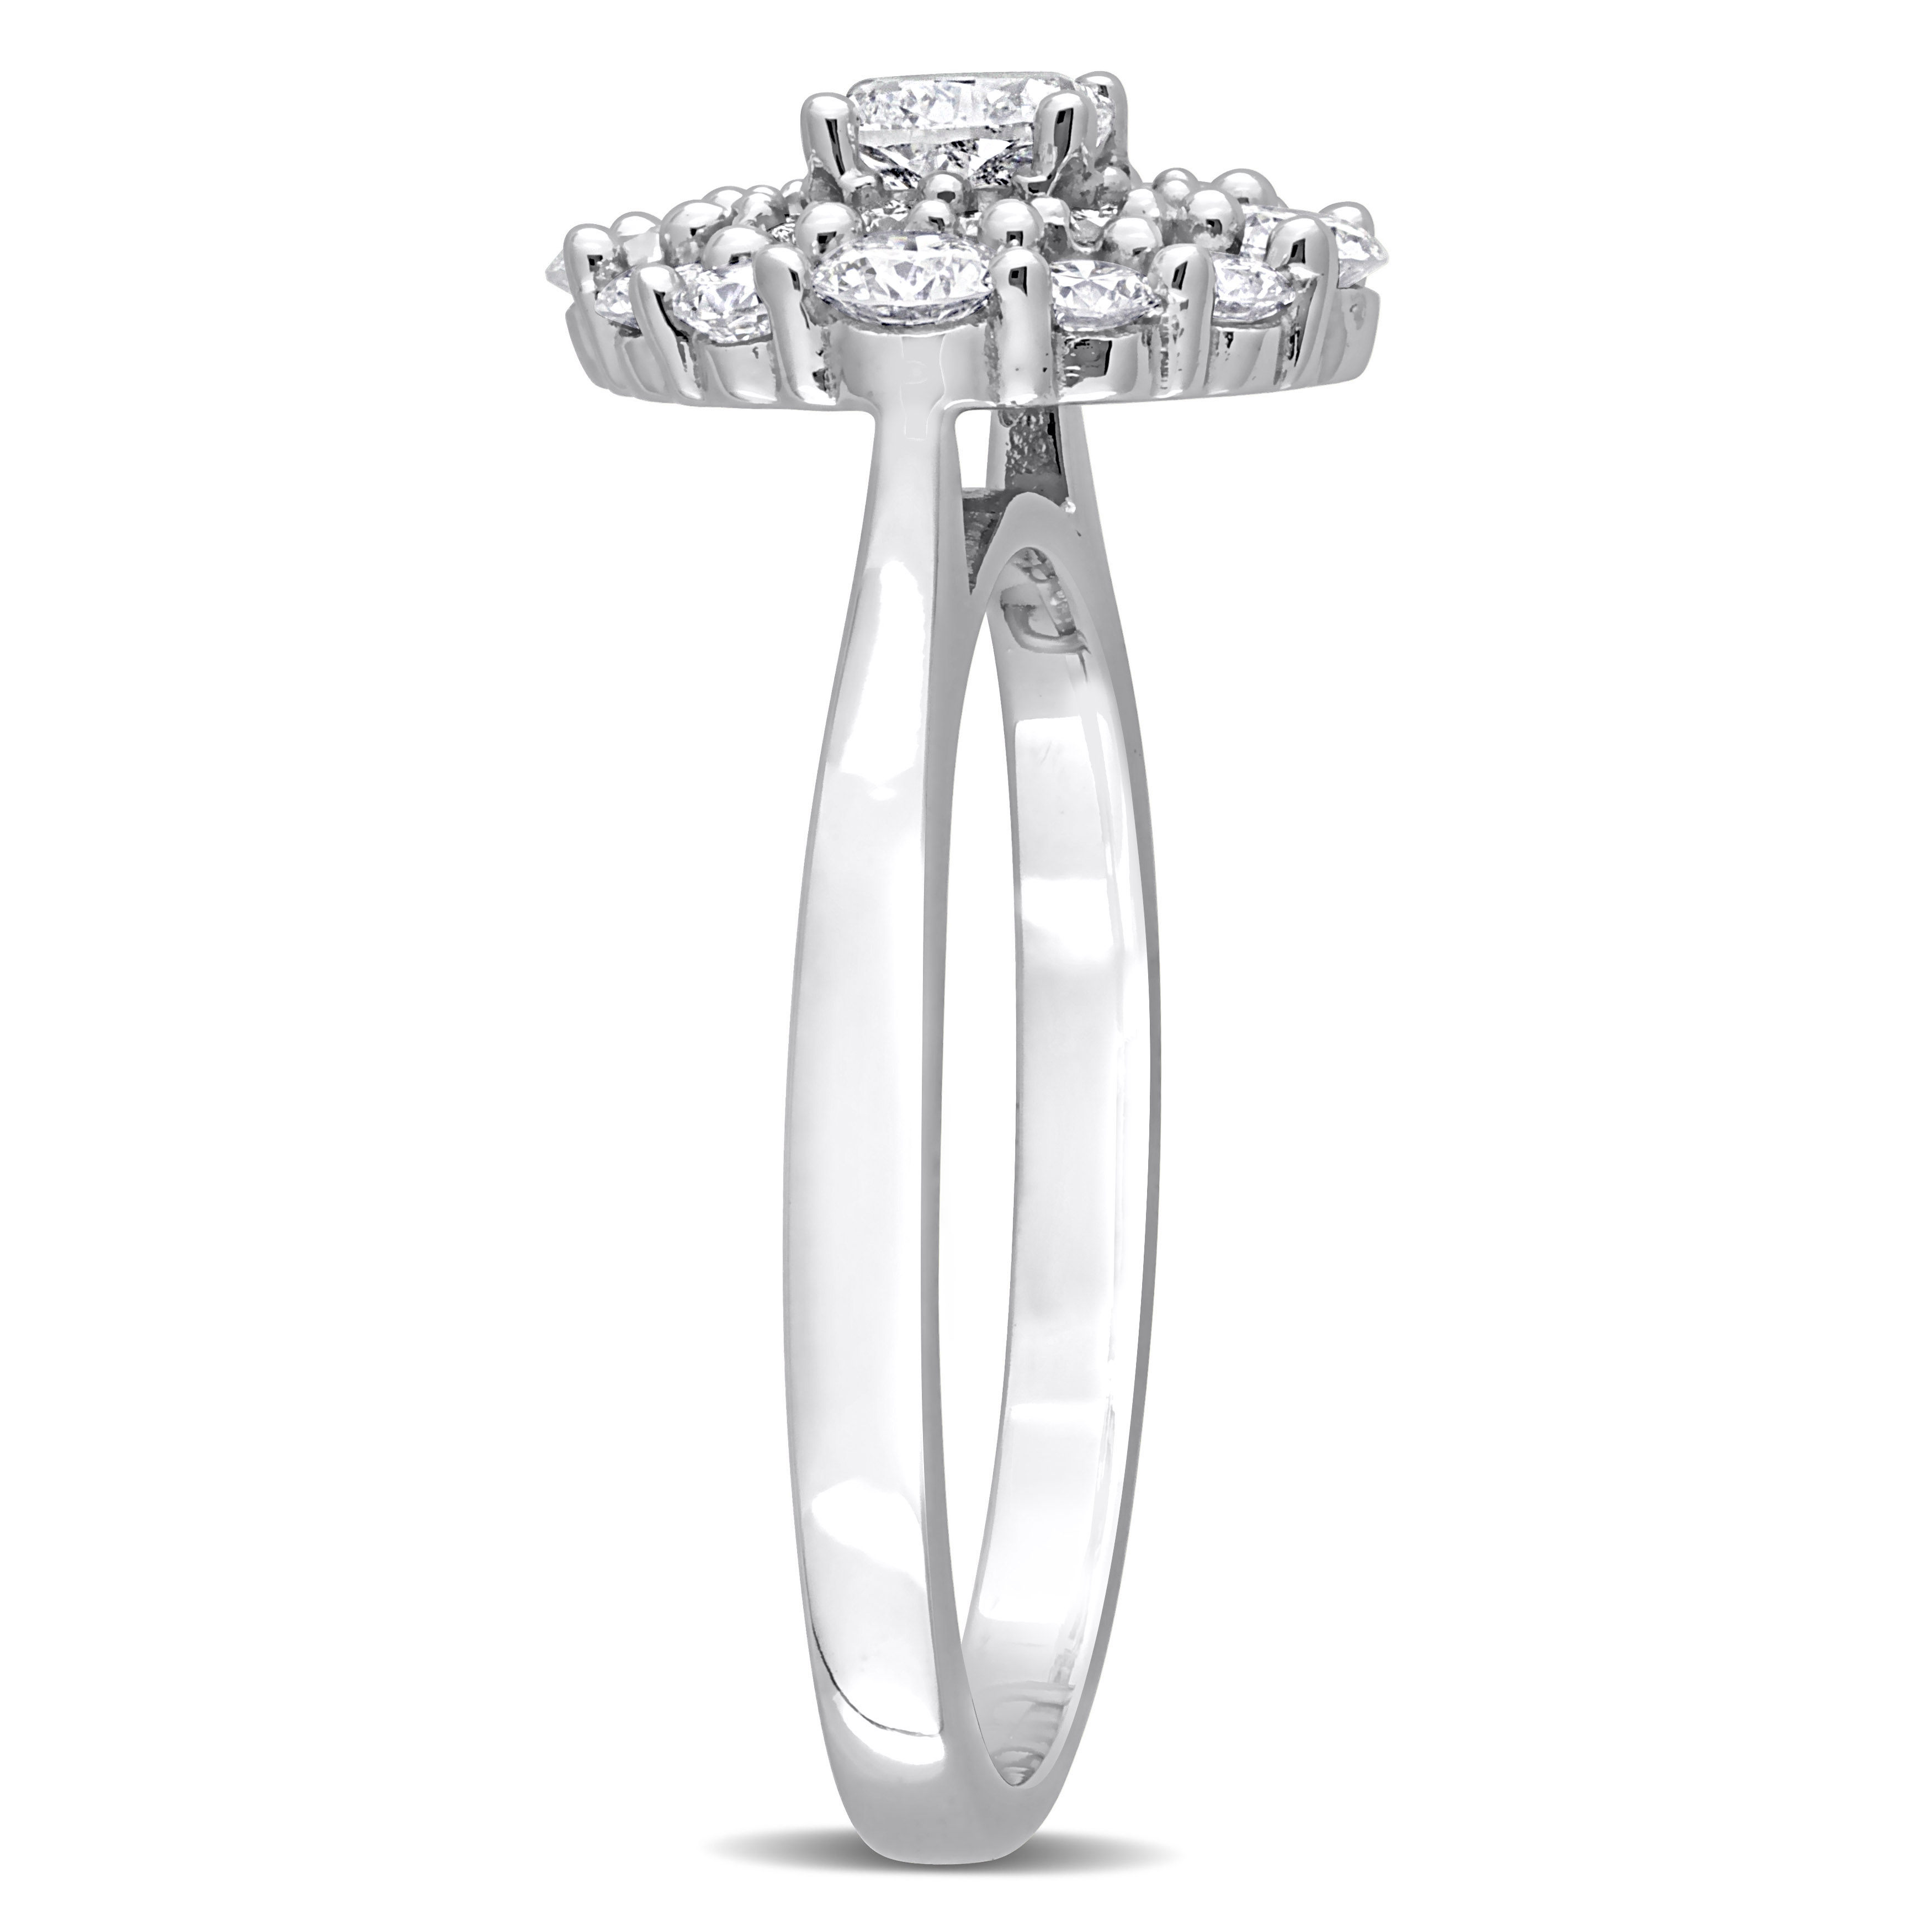 1 CT TW Cushion and Round-Cut Diamond Cluster Ring in 14k White Gold